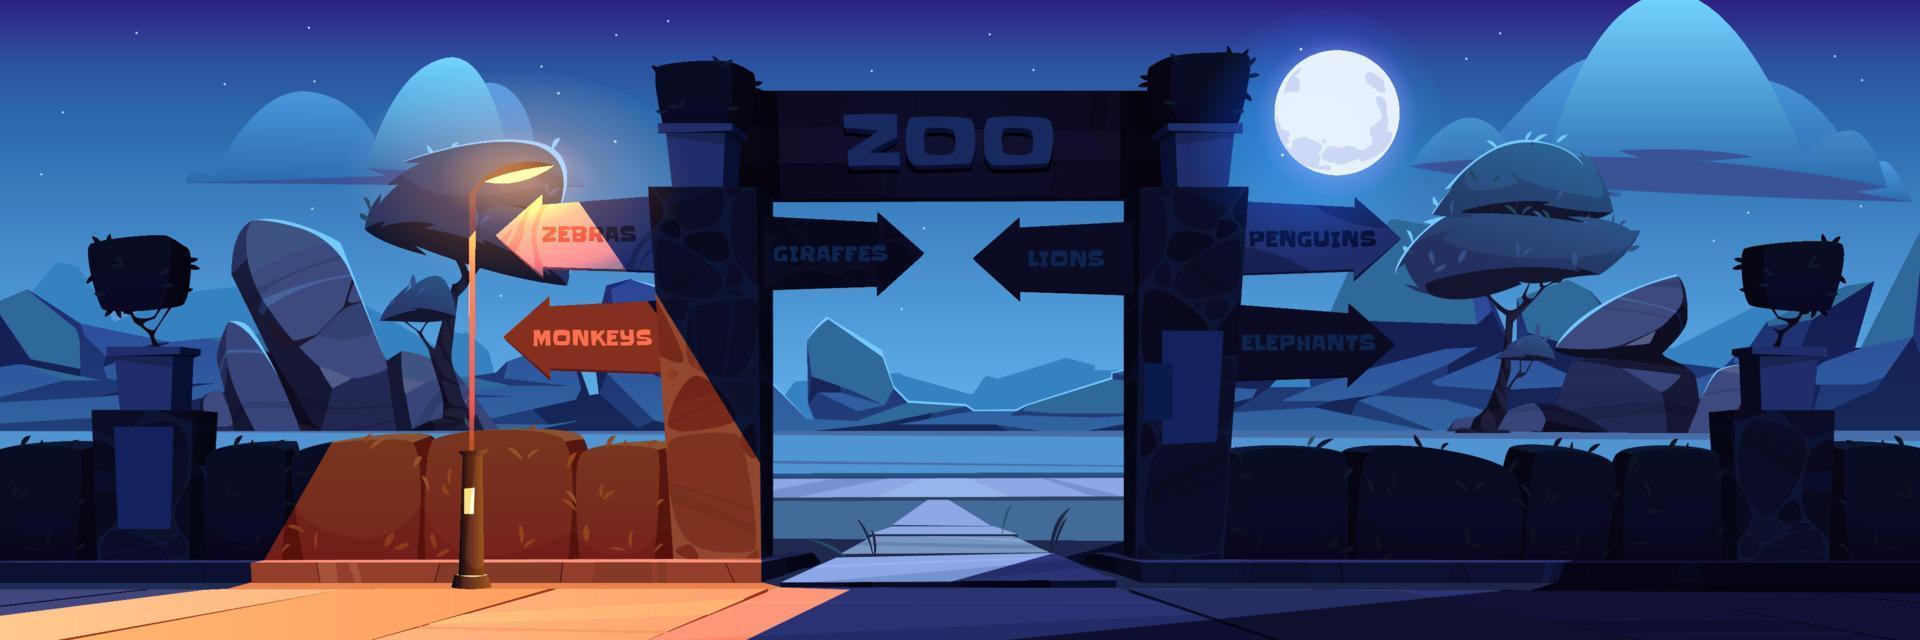 Vector illustration of zoo entrance at night